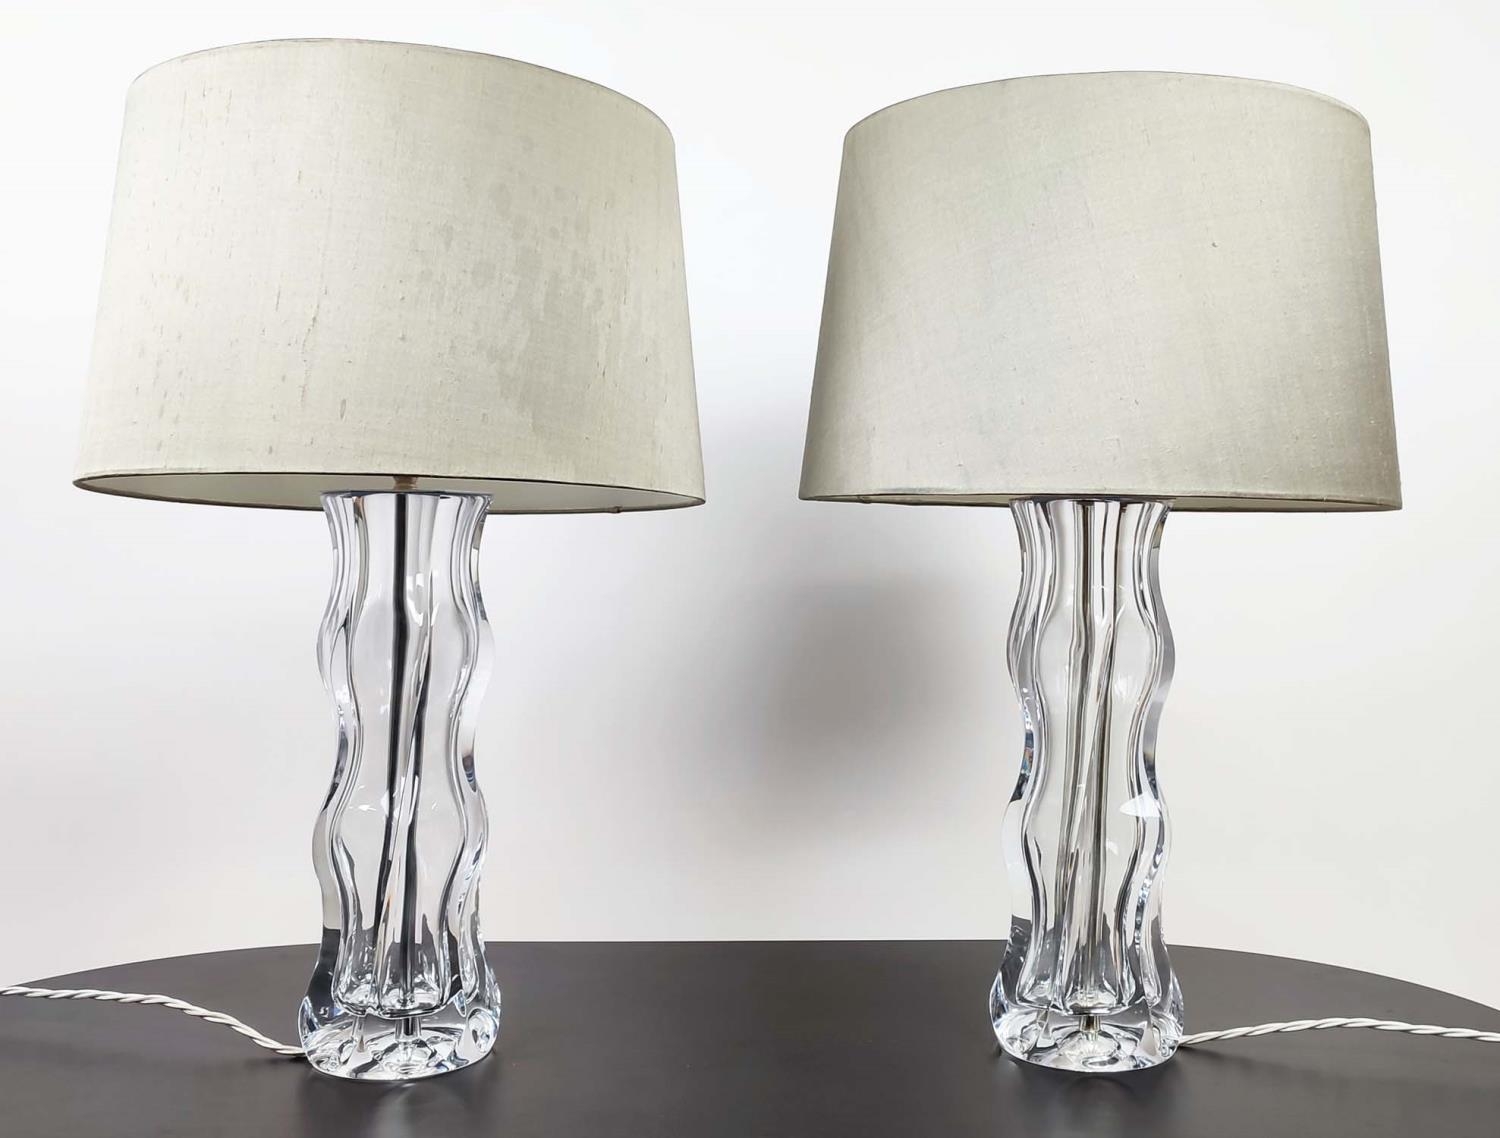 VAUGHAN TABLE LAMPS, a pair, glass with shades. (2) - Image 3 of 20